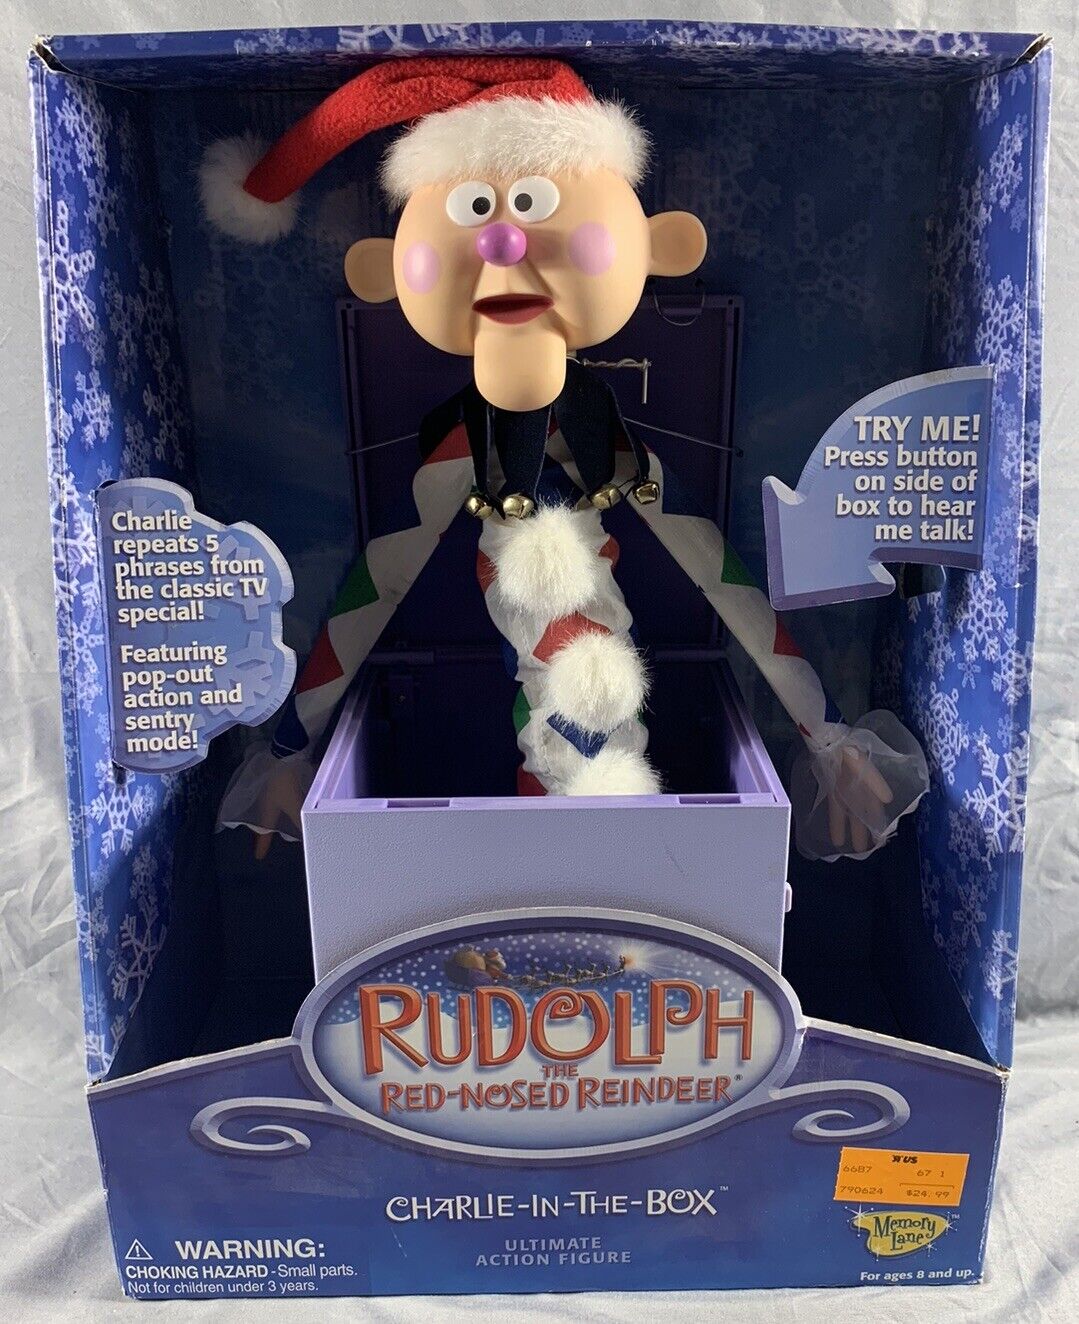 Rare NIB. 2003 Memory Lane Rudolph Red Nosed Reindeer Charlie-In-The-Box